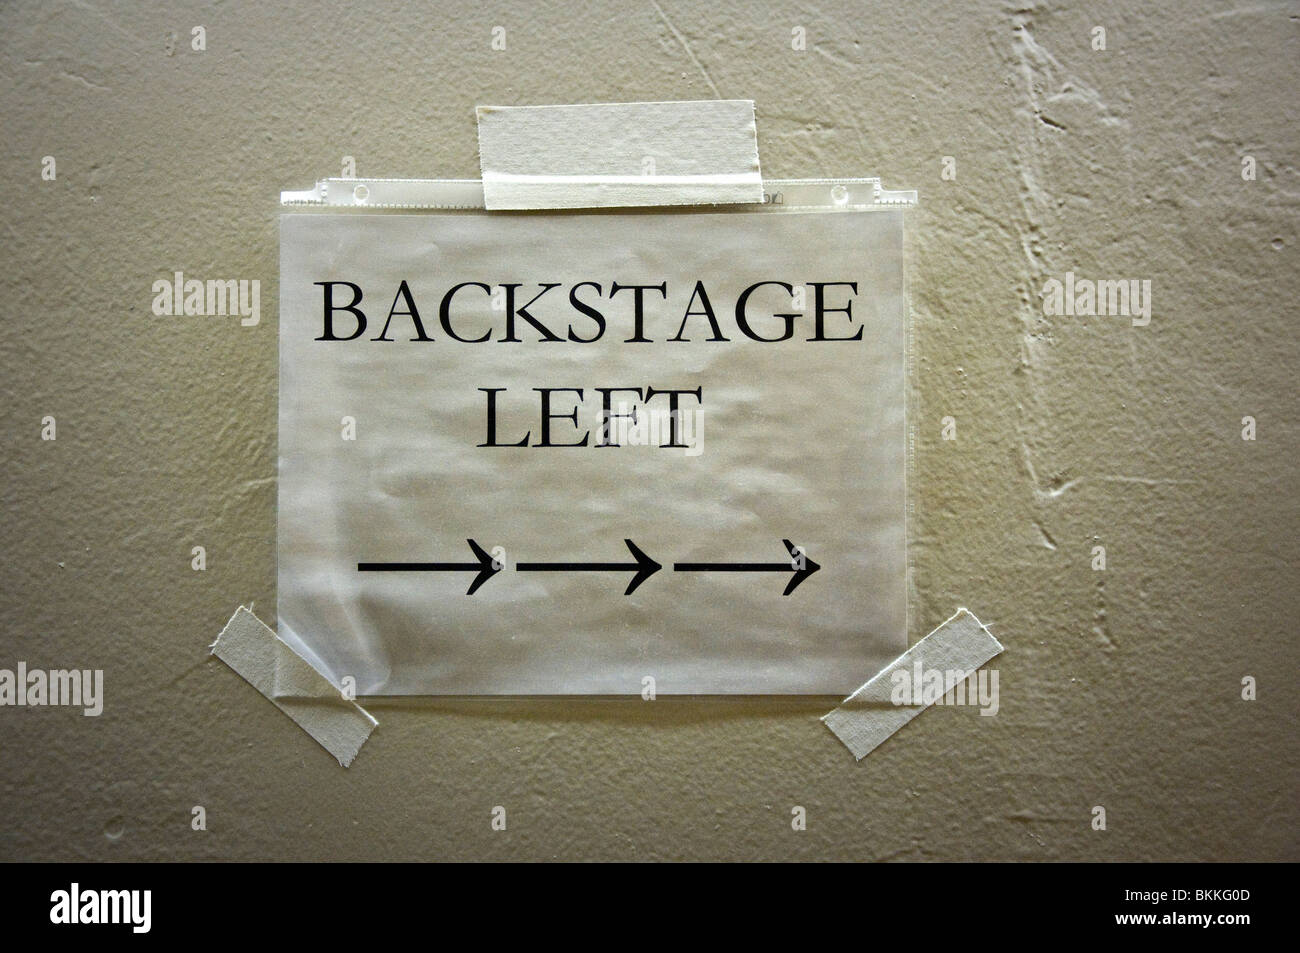 Theater backstage left sign. Stock Photo